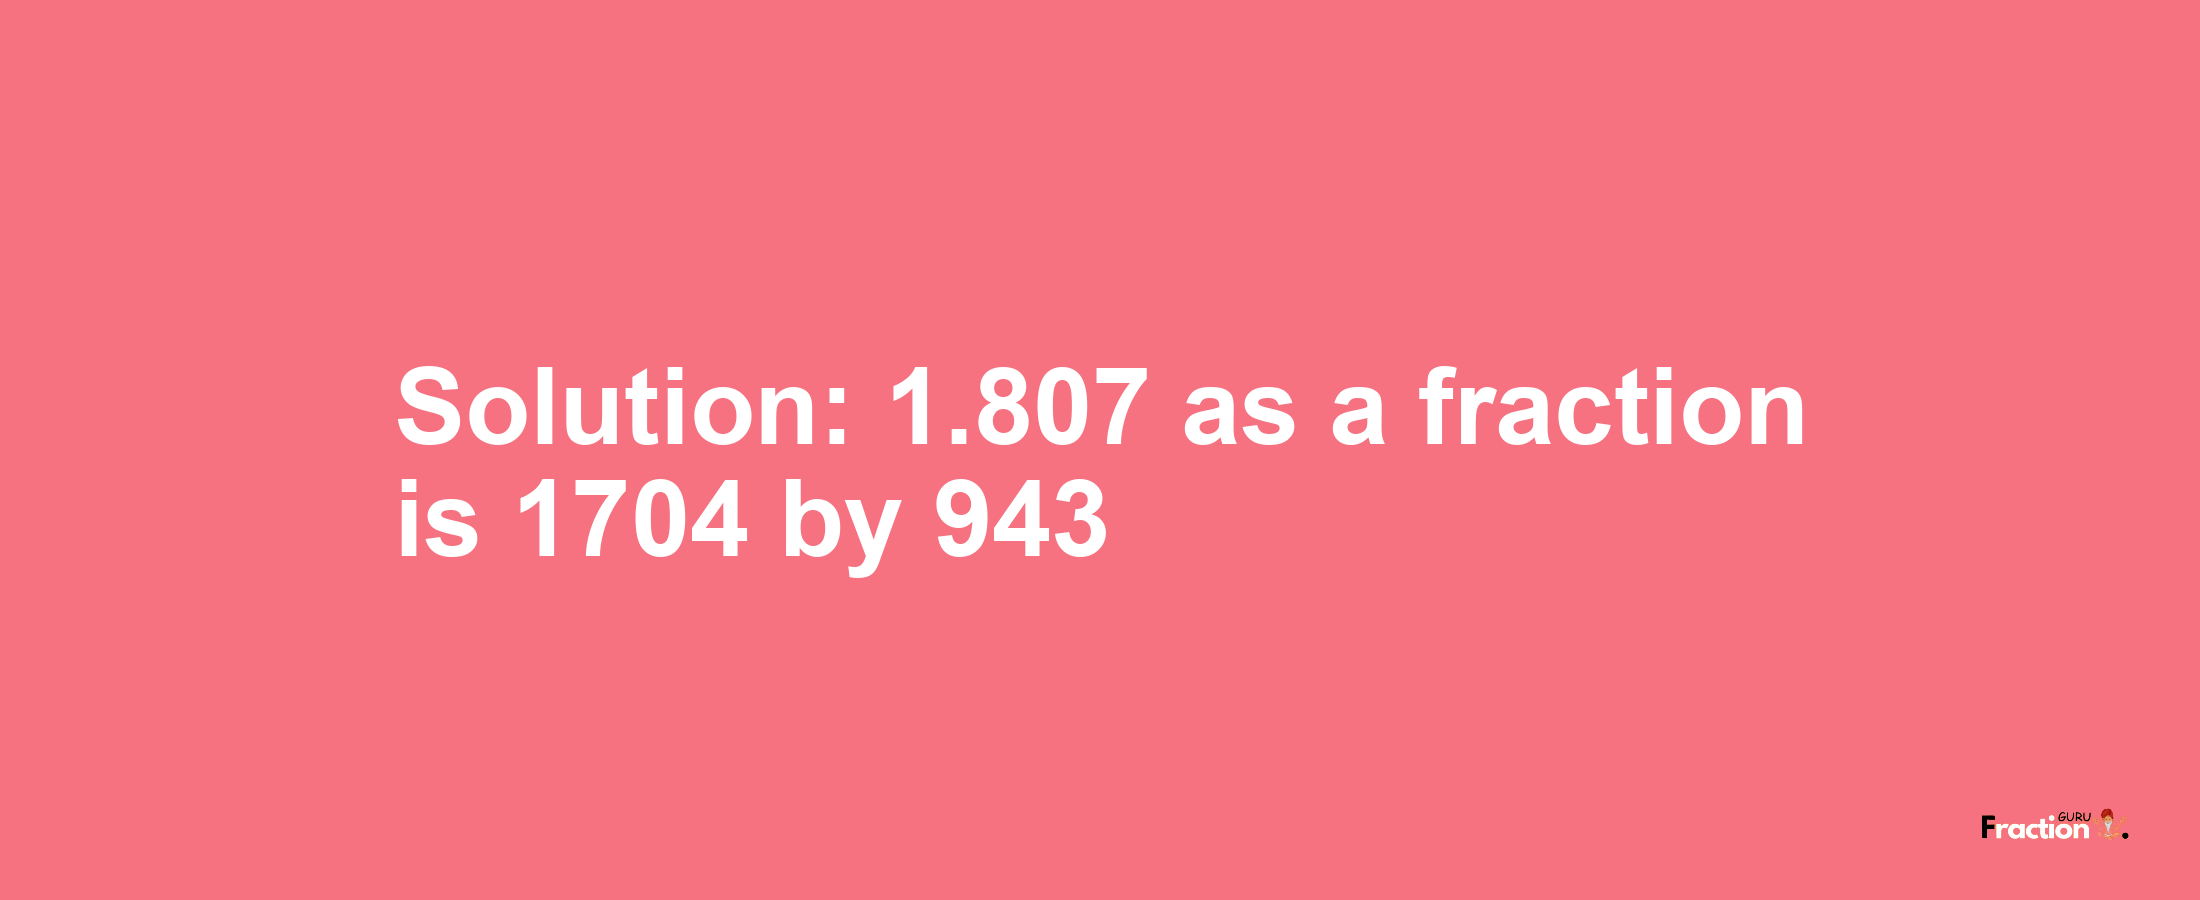 Solution:1.807 as a fraction is 1704/943